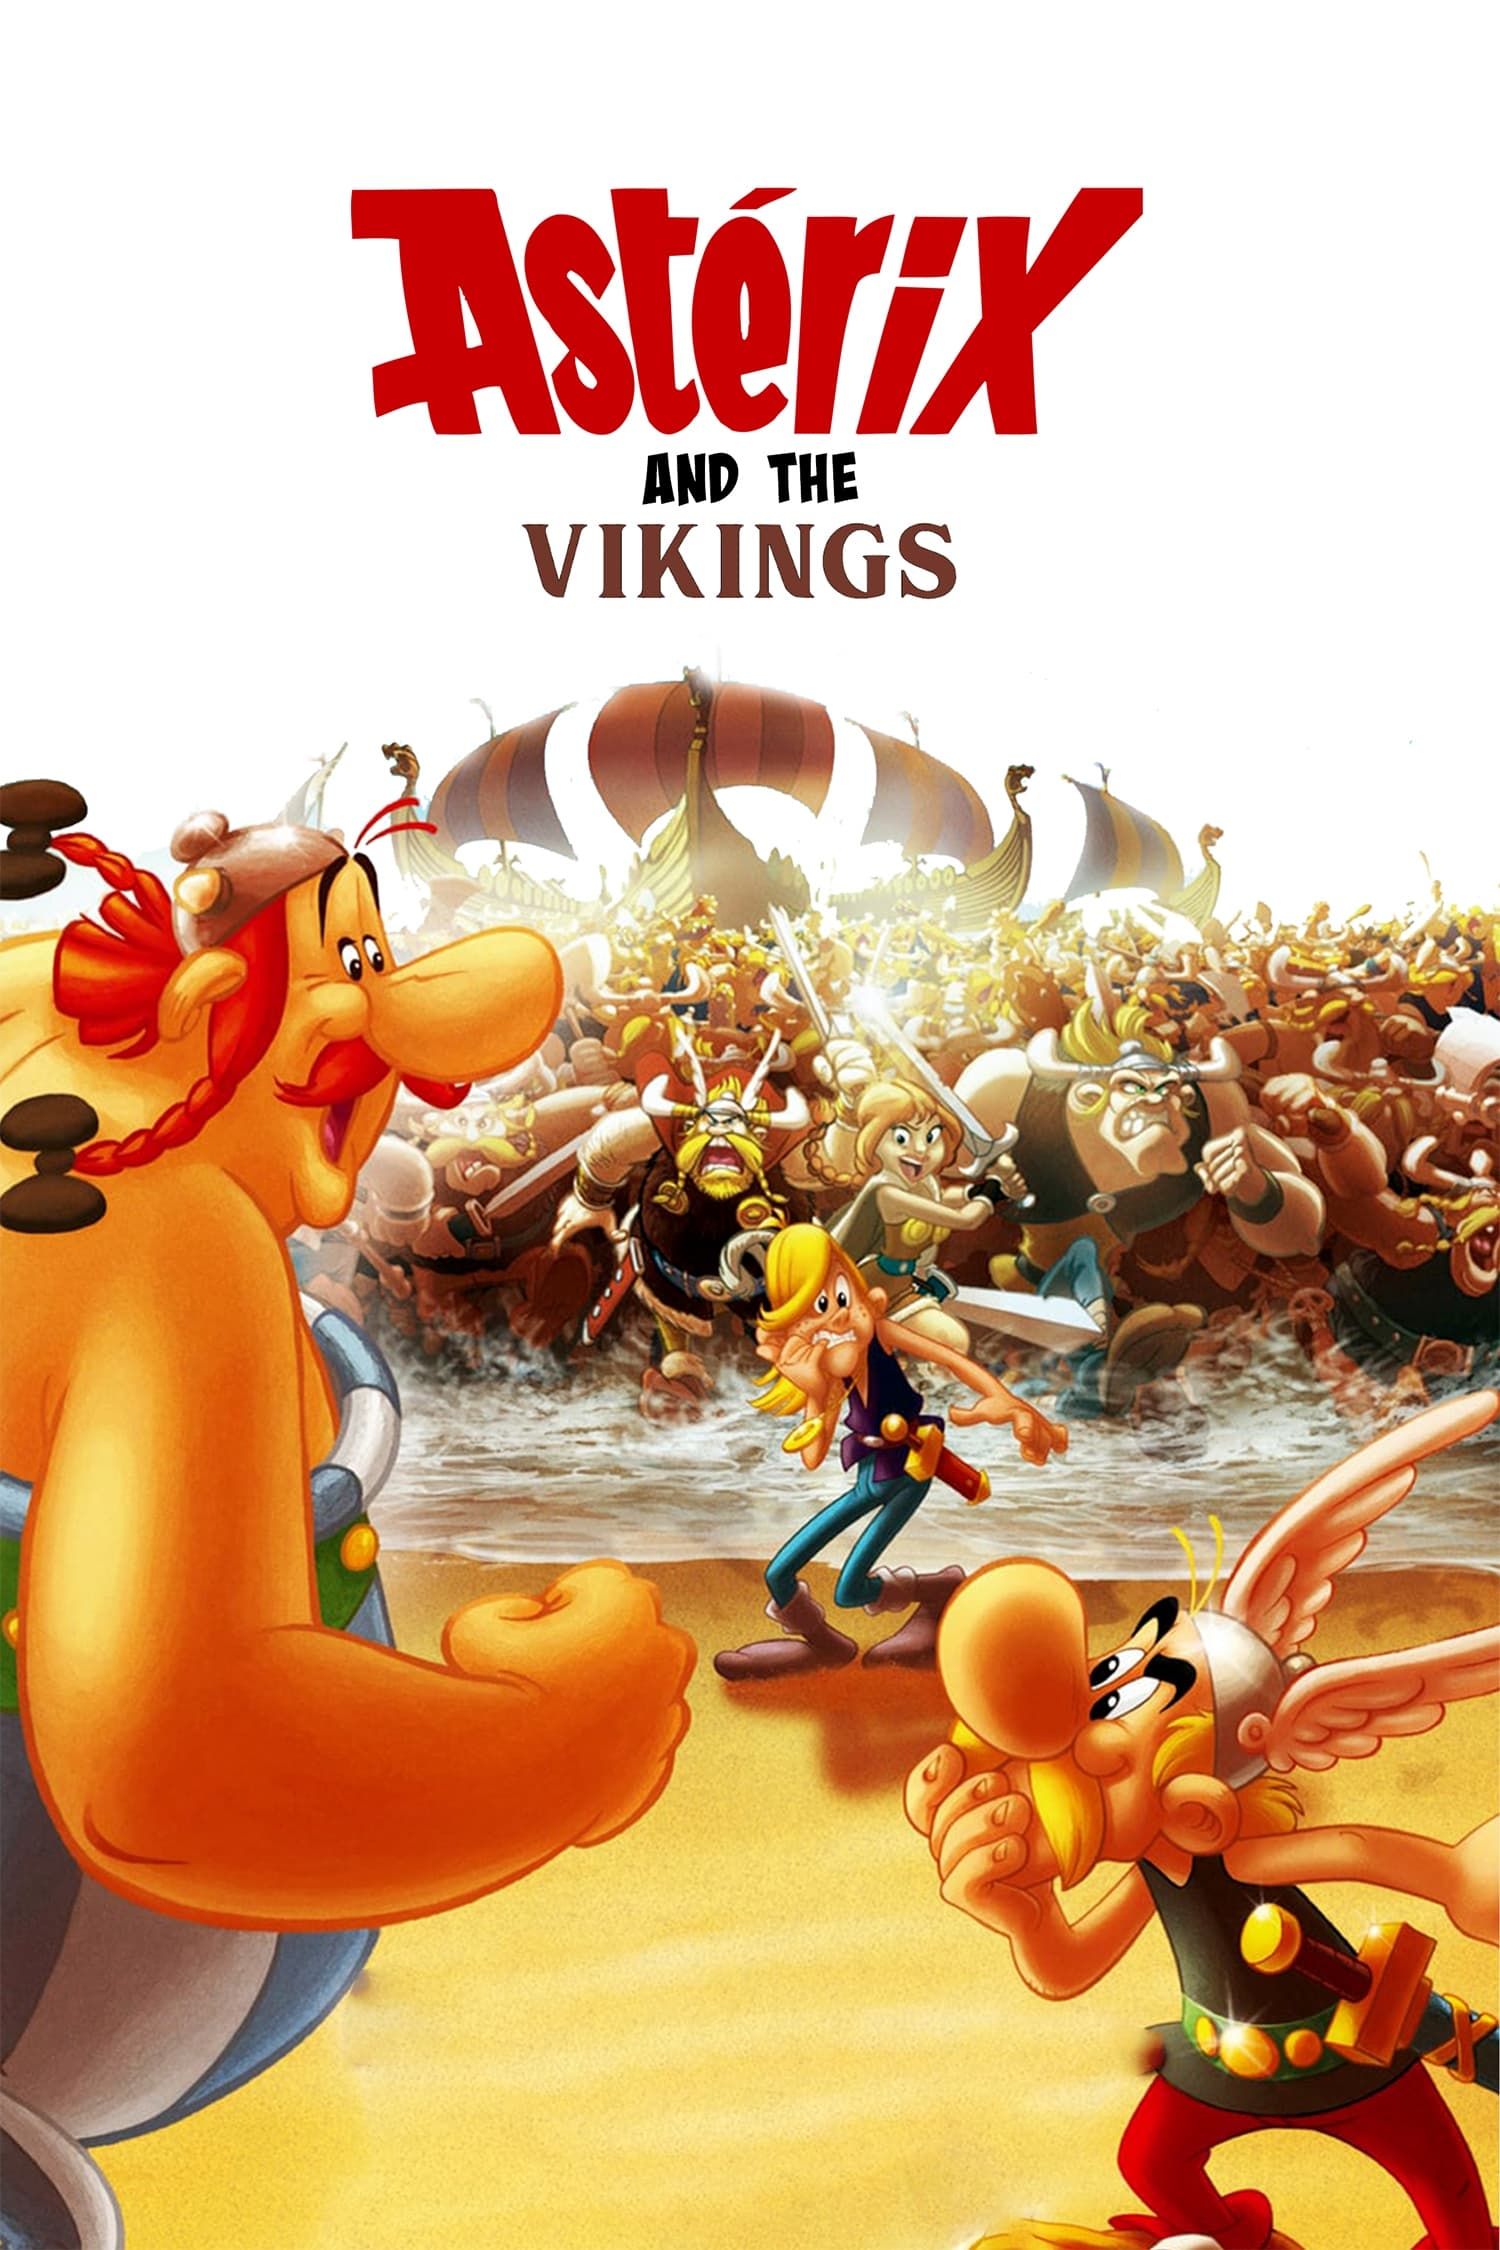 Asterix and Obelix: Mansion of the Gods (2014) - IMDb